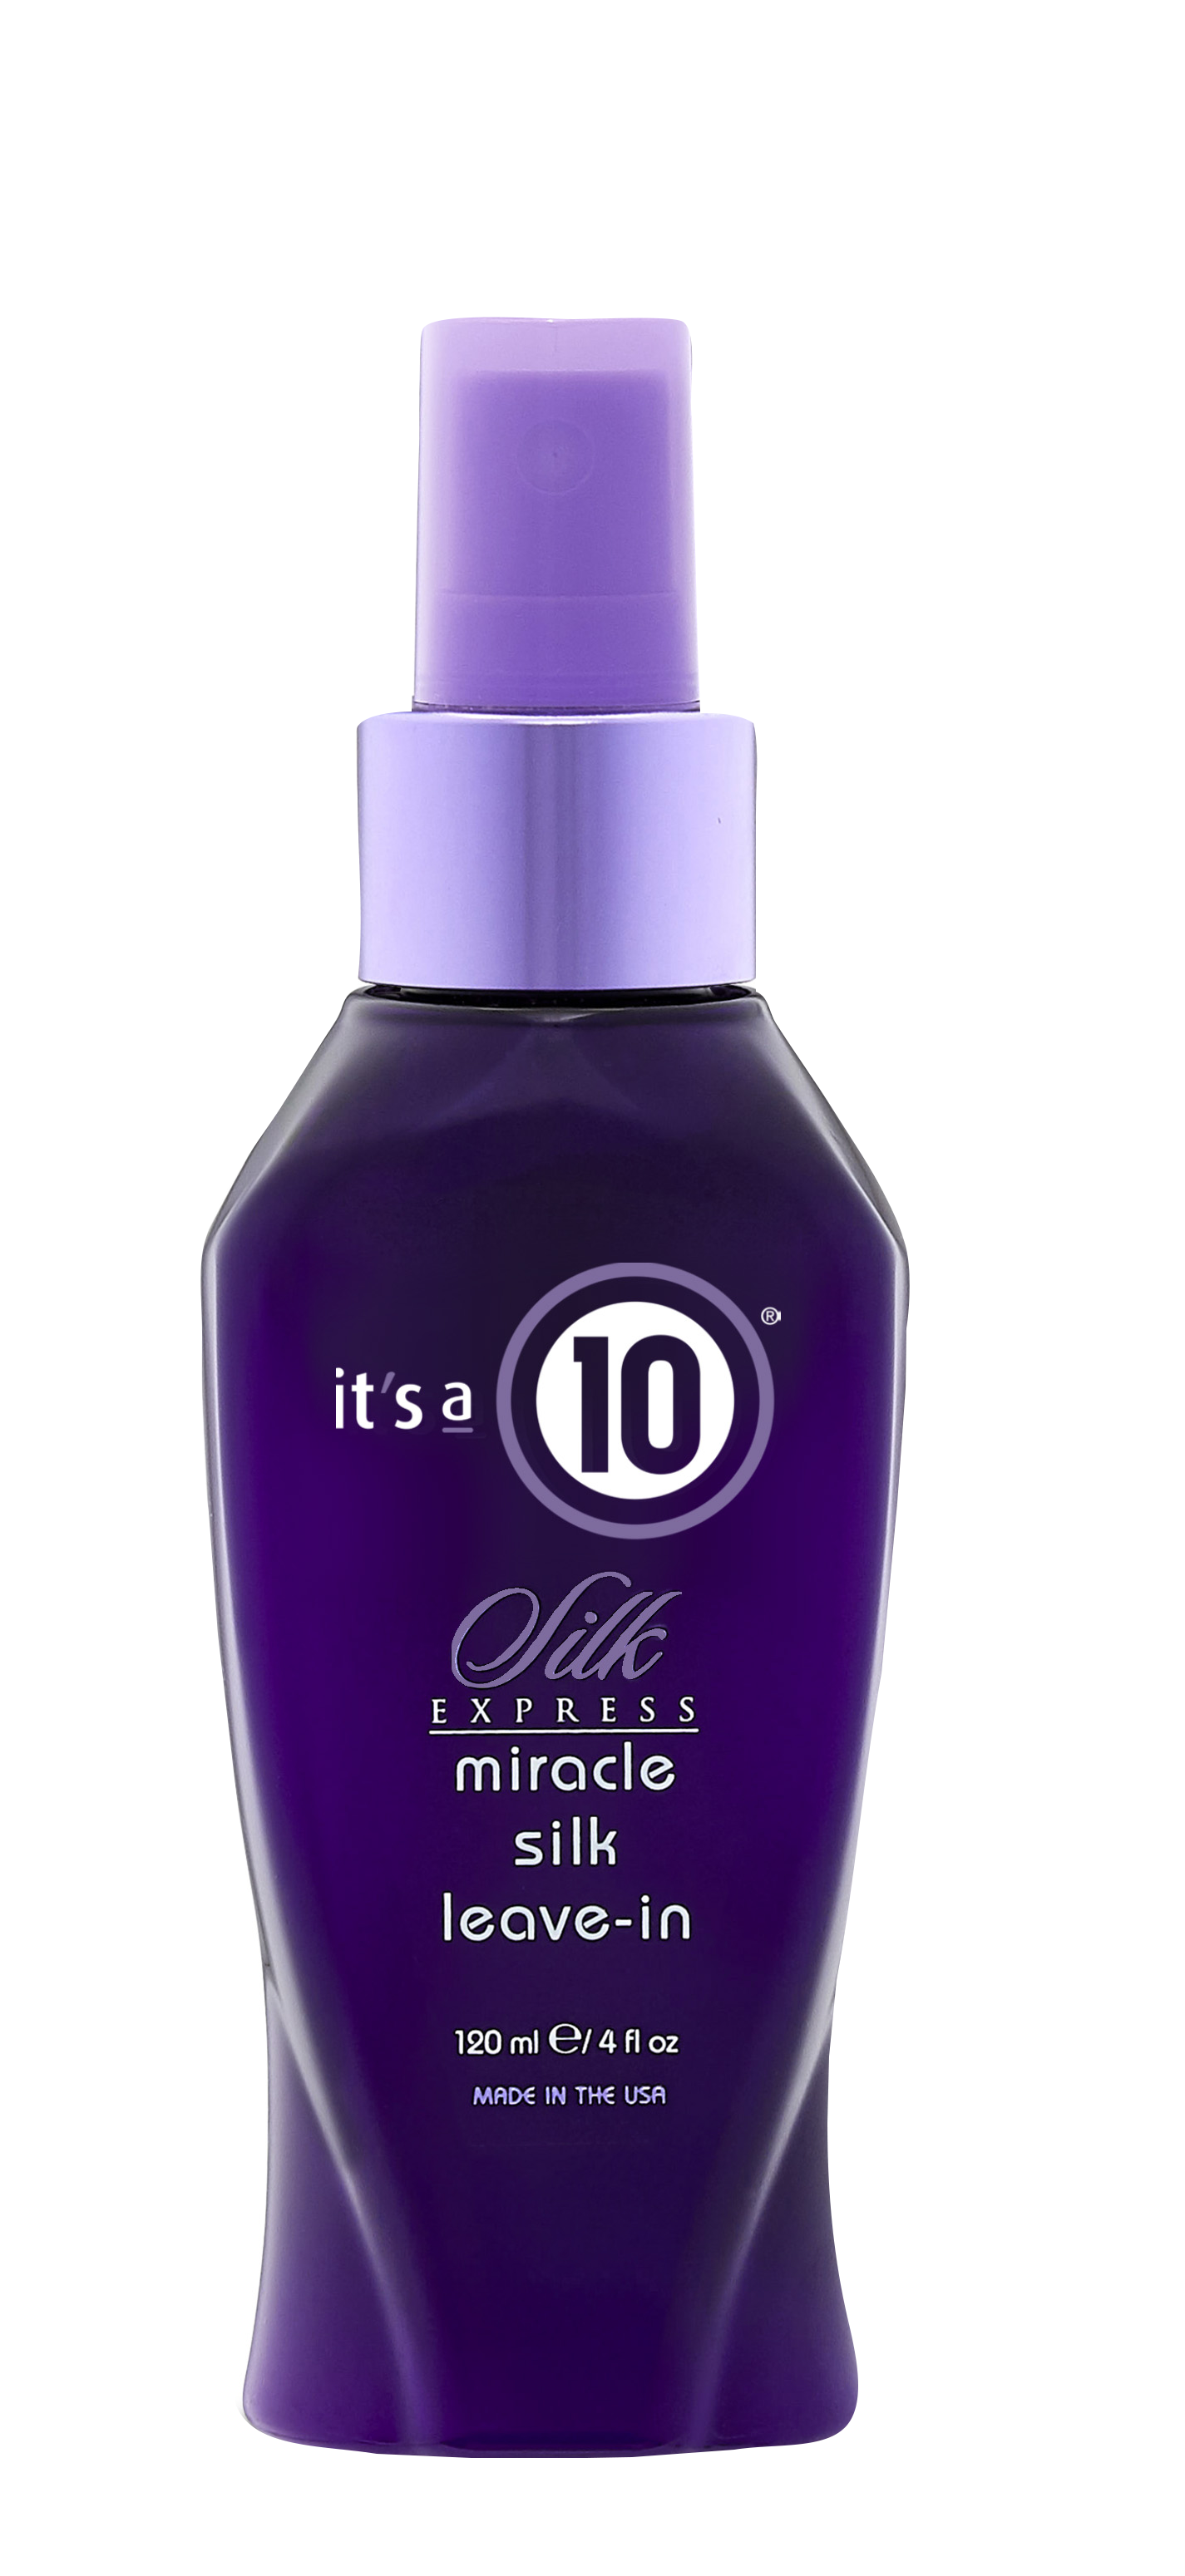 It's a 10 Miracle Silk Leave-In Conditioner